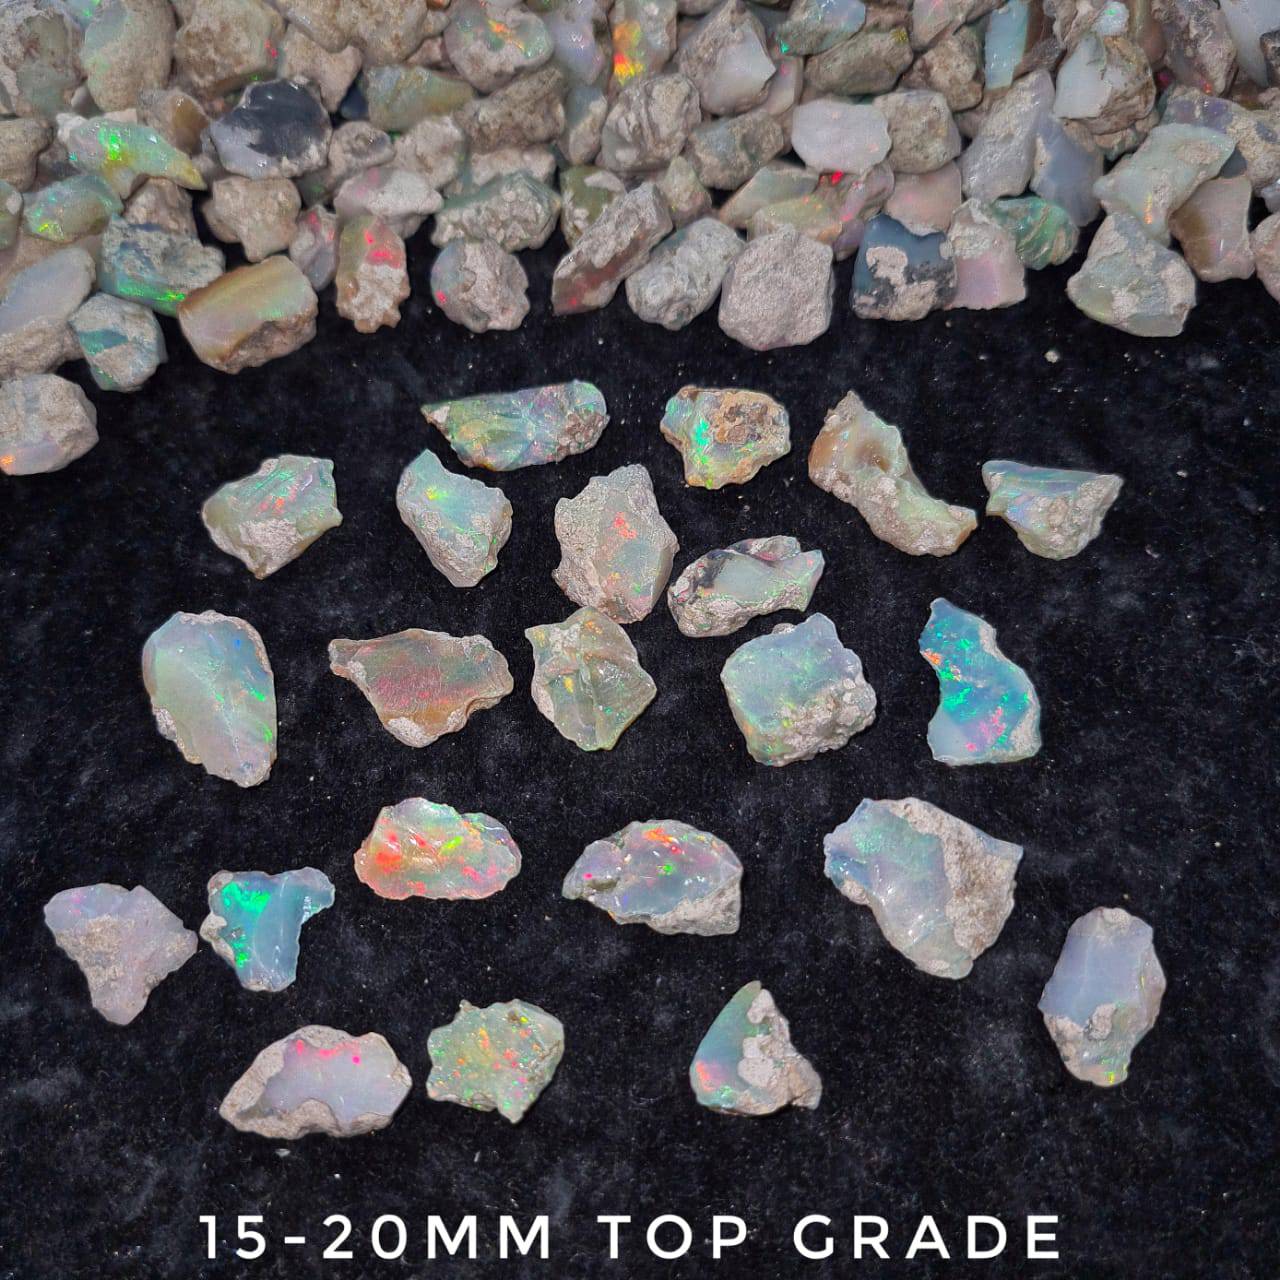 Bigger Size Opal Rough Minerals Untreated Ethiopian Mined | 20-25mm AAA Quality - The LabradoriteKing